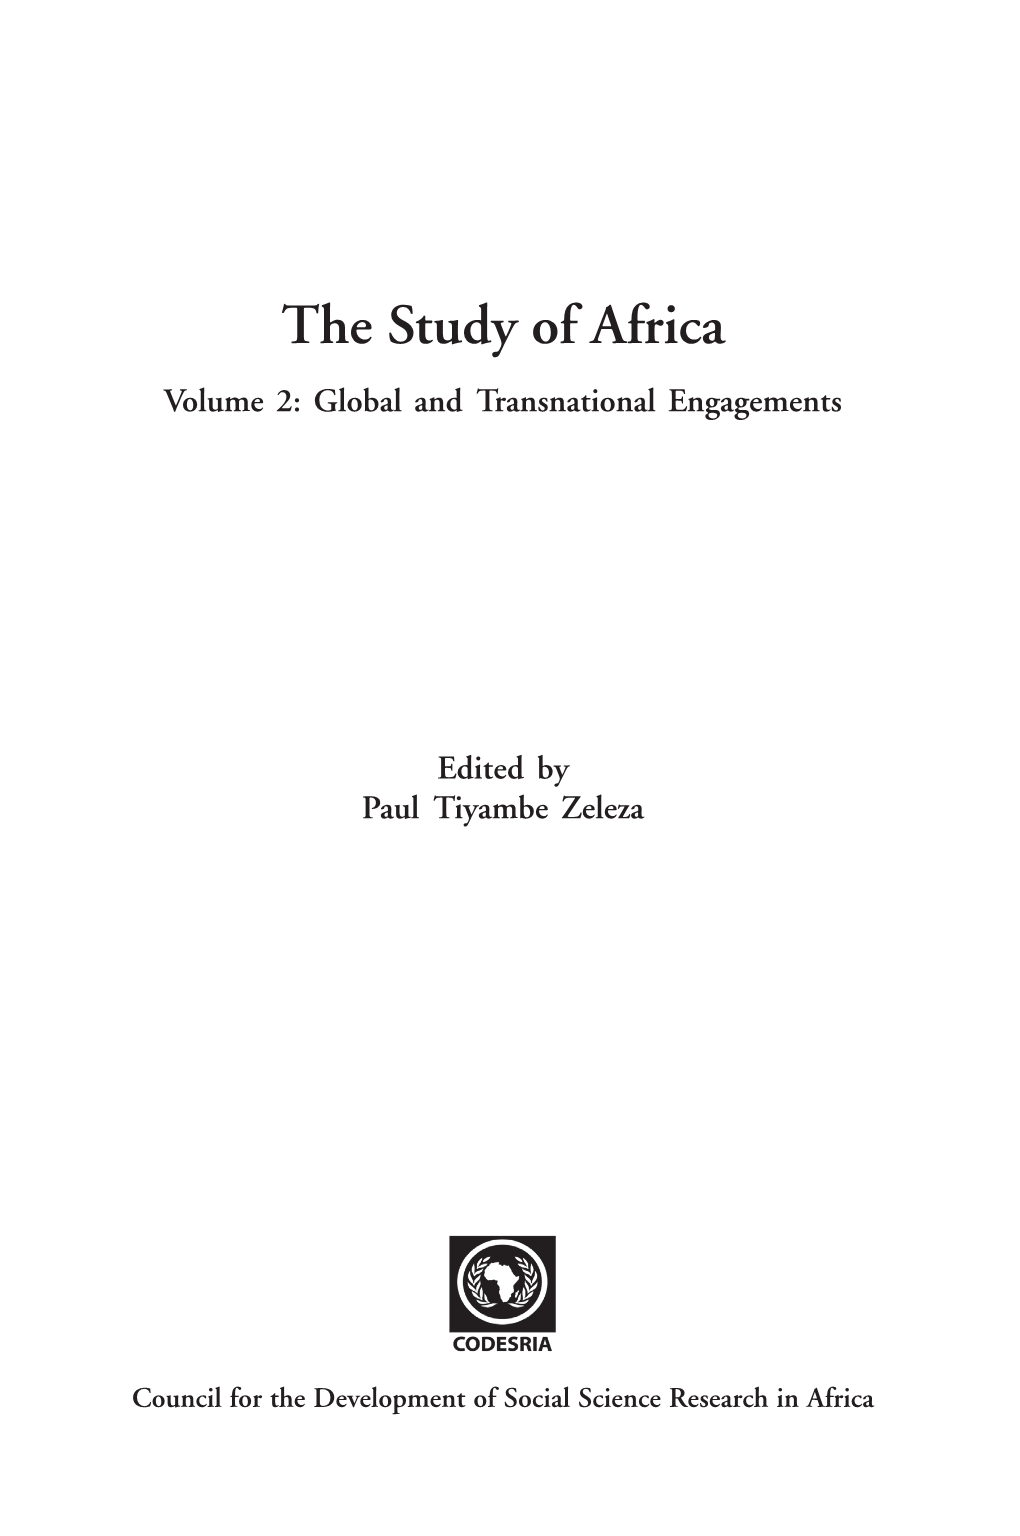 The Study of Africa Vol 2